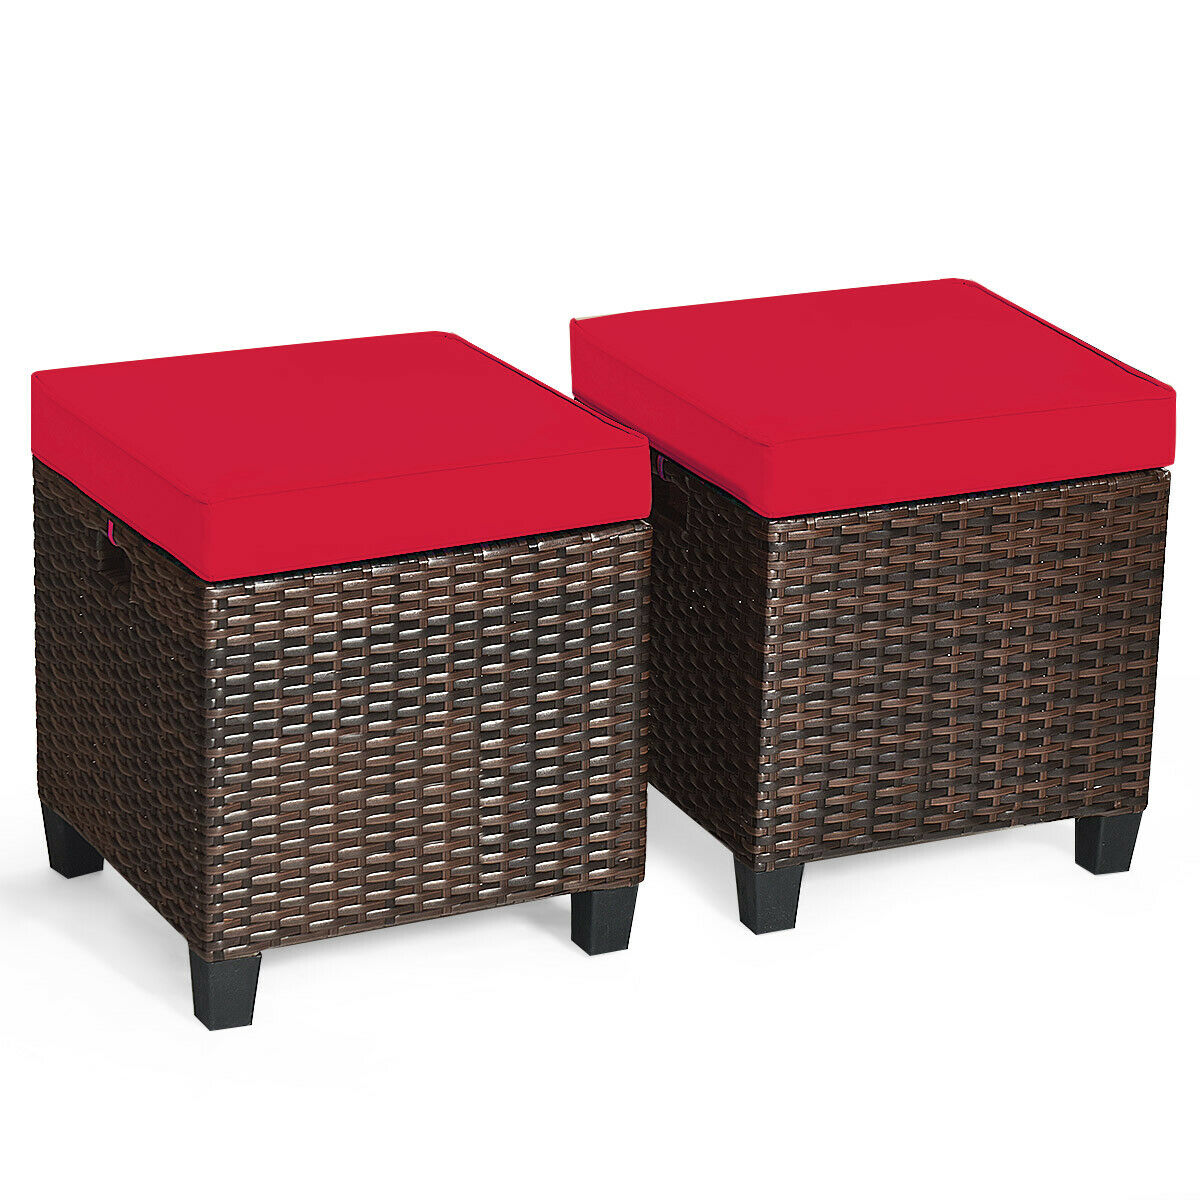 Set of 2 Outdoor Rattan Ottoman Chair Seat with Padded Cushions Red